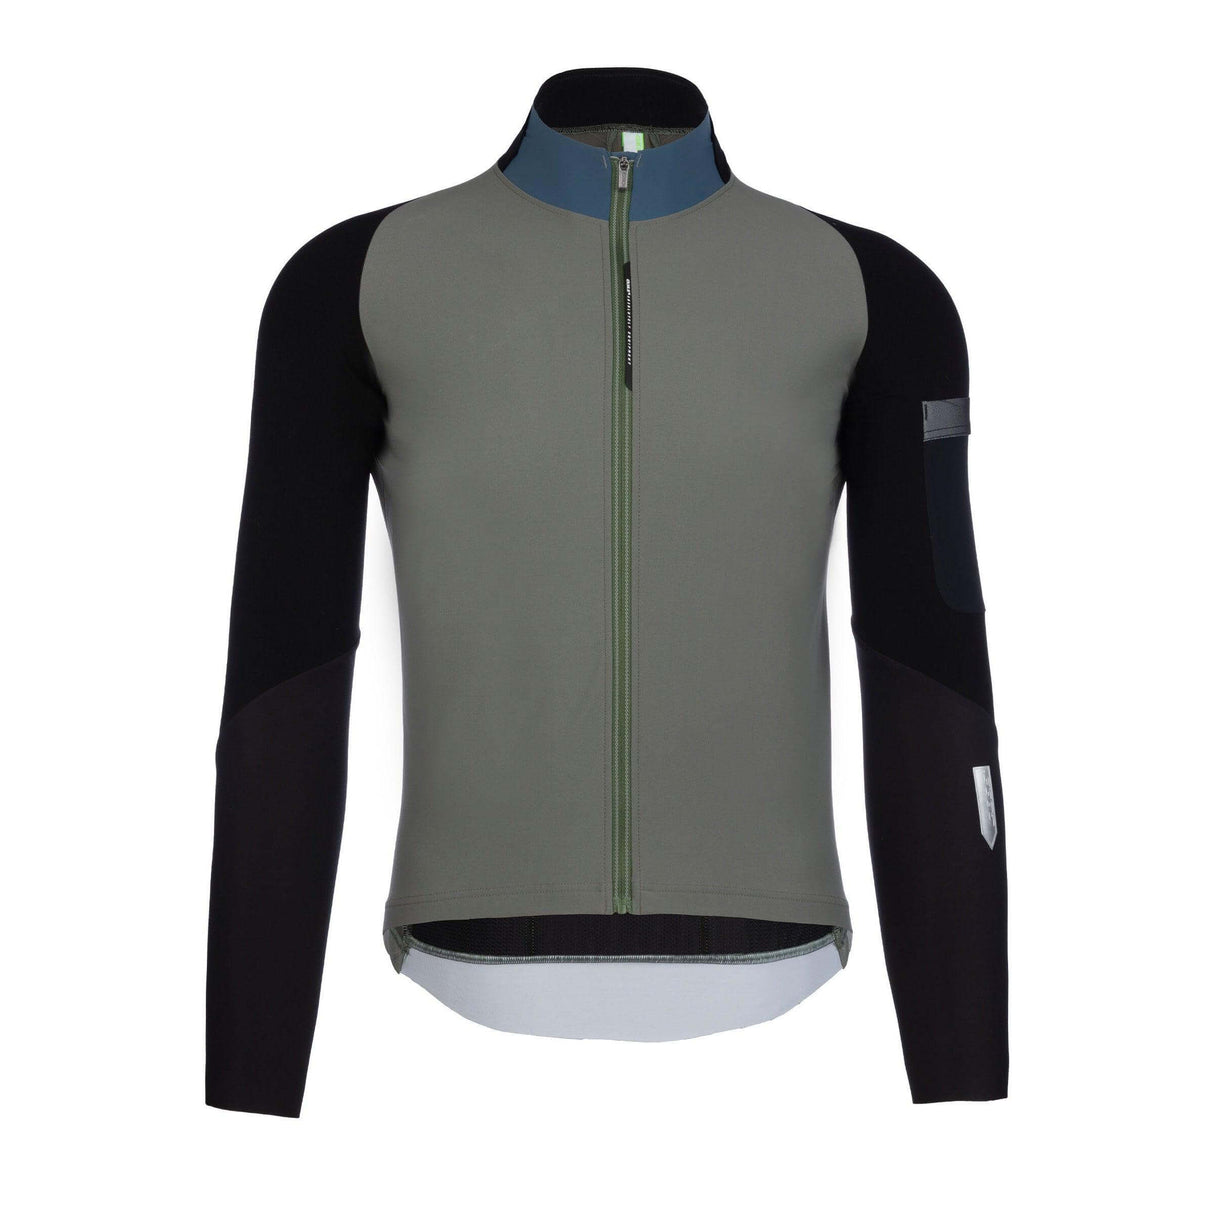 Q36.5 Hybrid Que X Long Sleeve Cycling Jersey | Strictly Bicycles